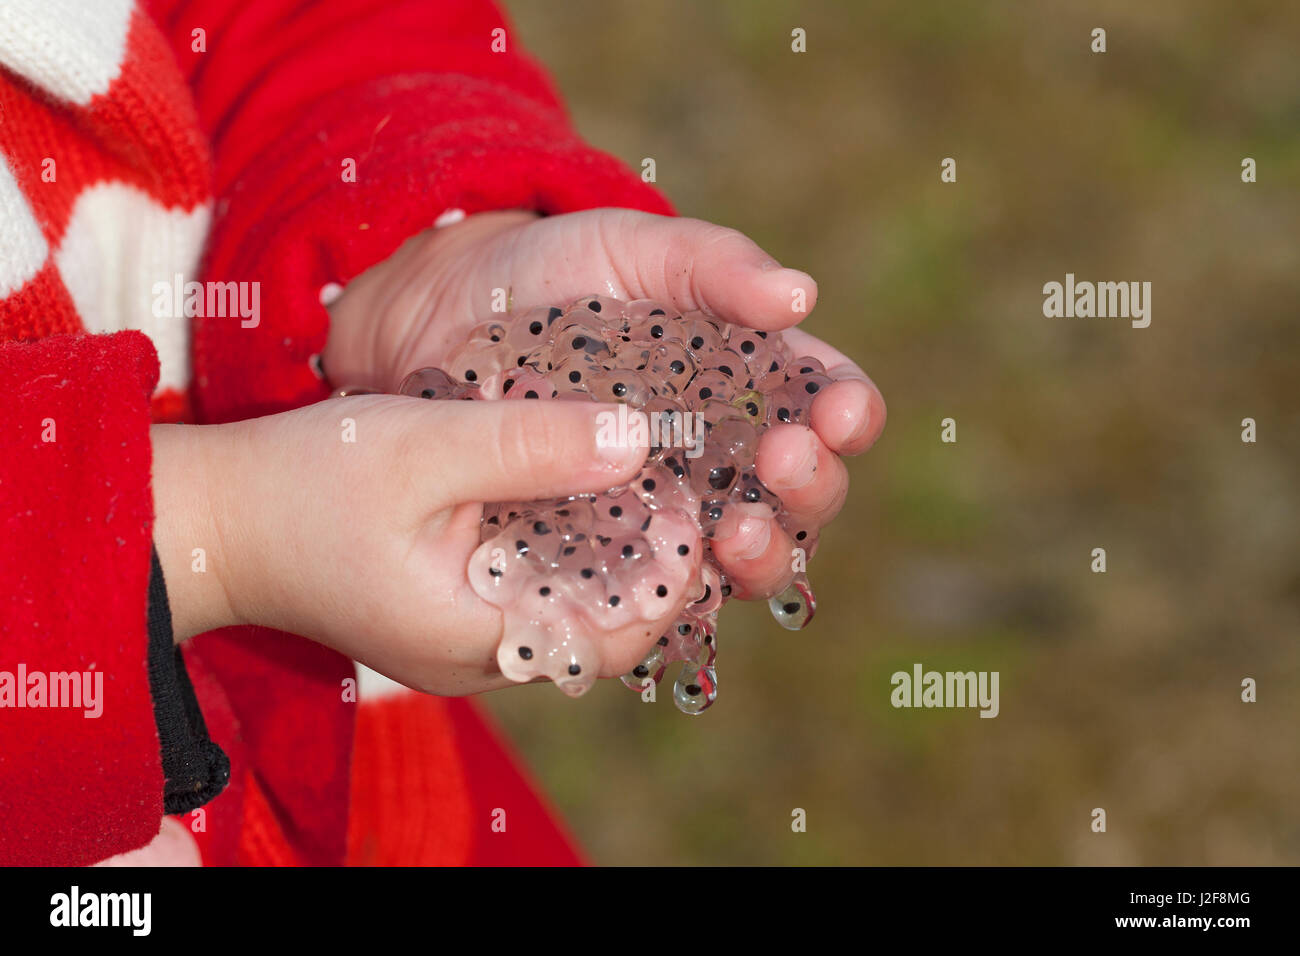 Blooded Hands Stock Photos & Blooded Hands Stock Images - Alamy